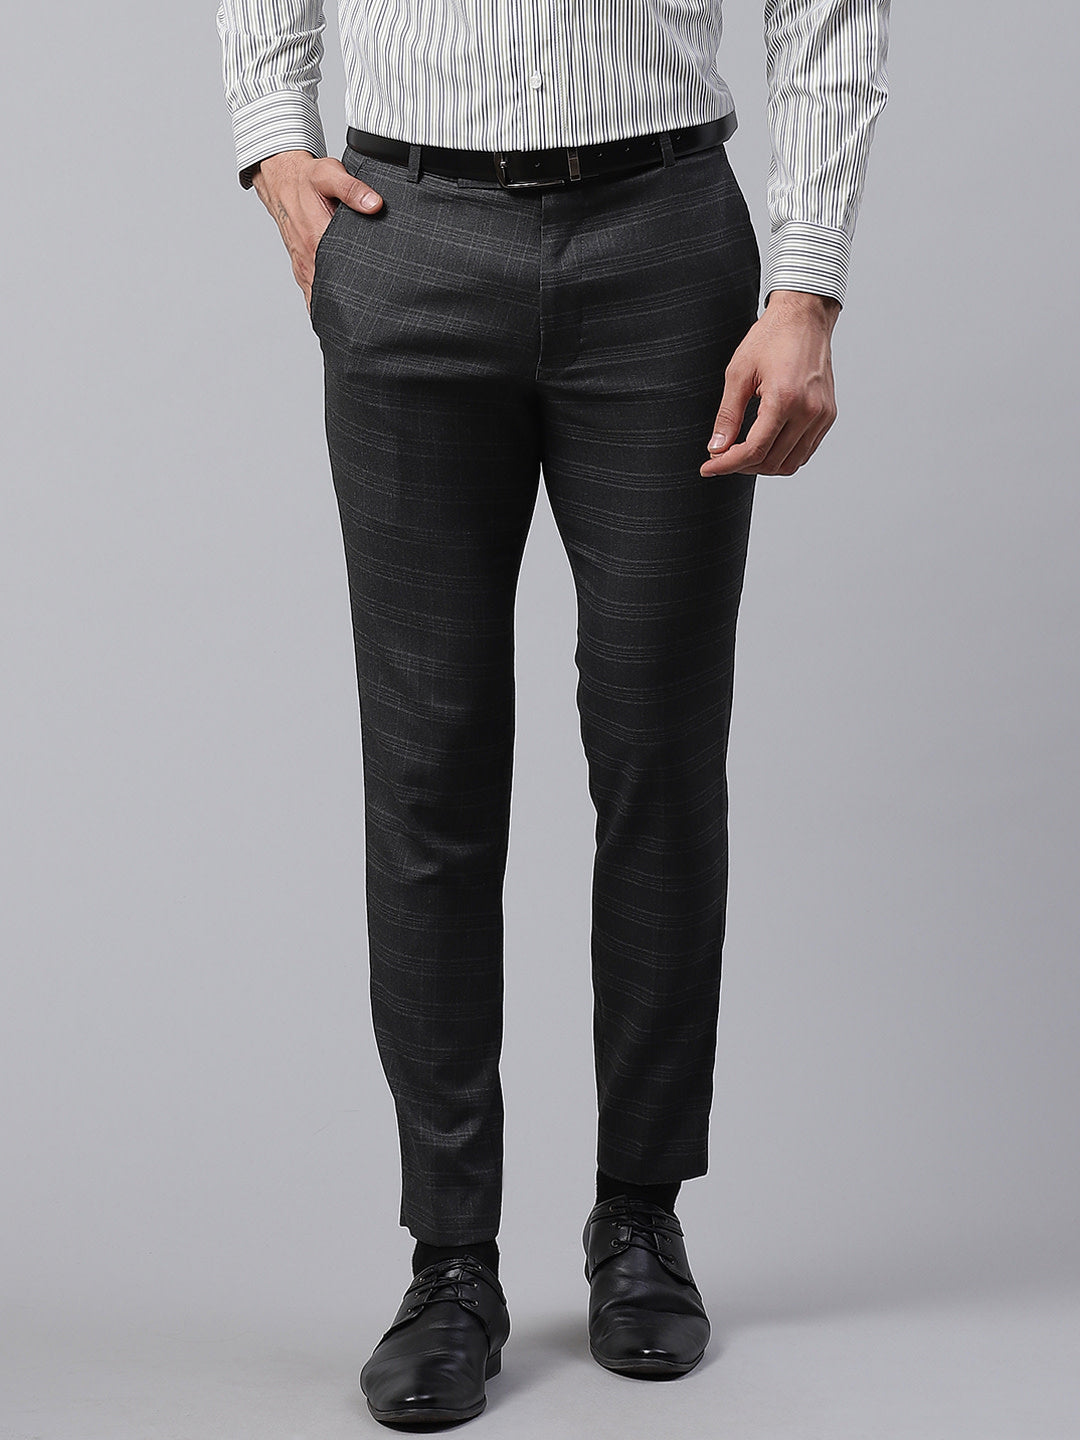 Buy INVICTUS Men Black & Blue Slim Fit Checked Formal Trousers - Trousers  for Men 2314239 | Myntra